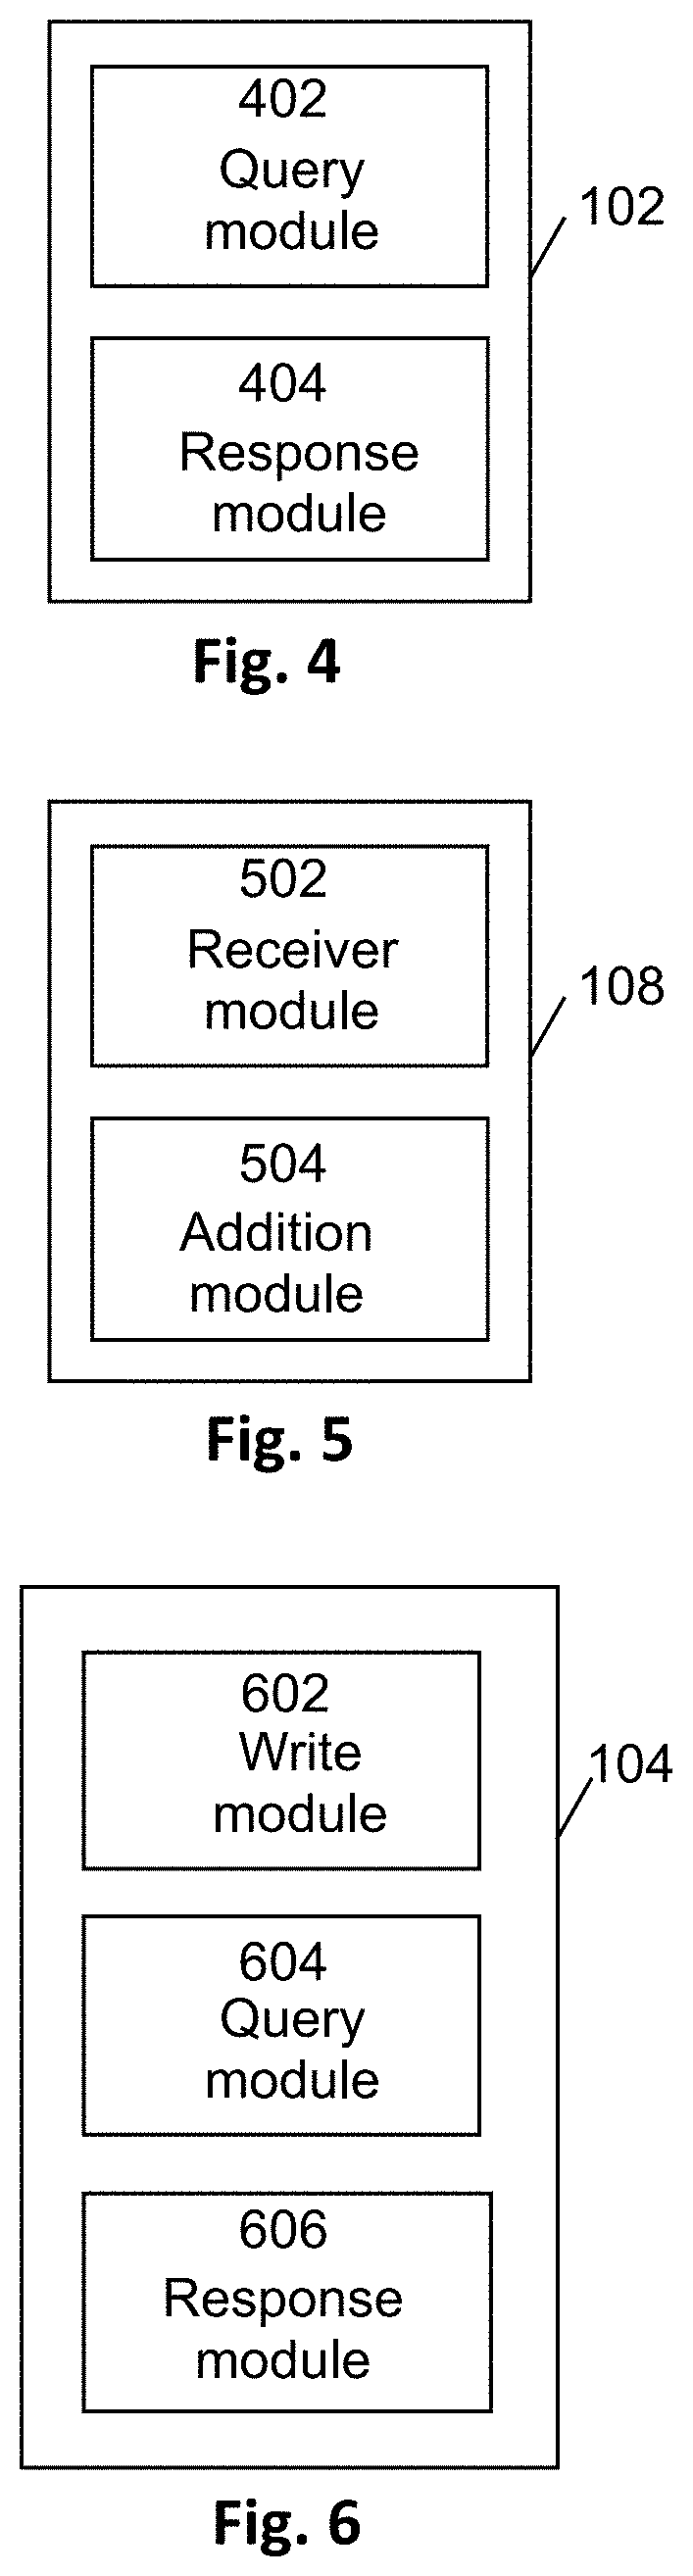 System and Method for Product Authentication